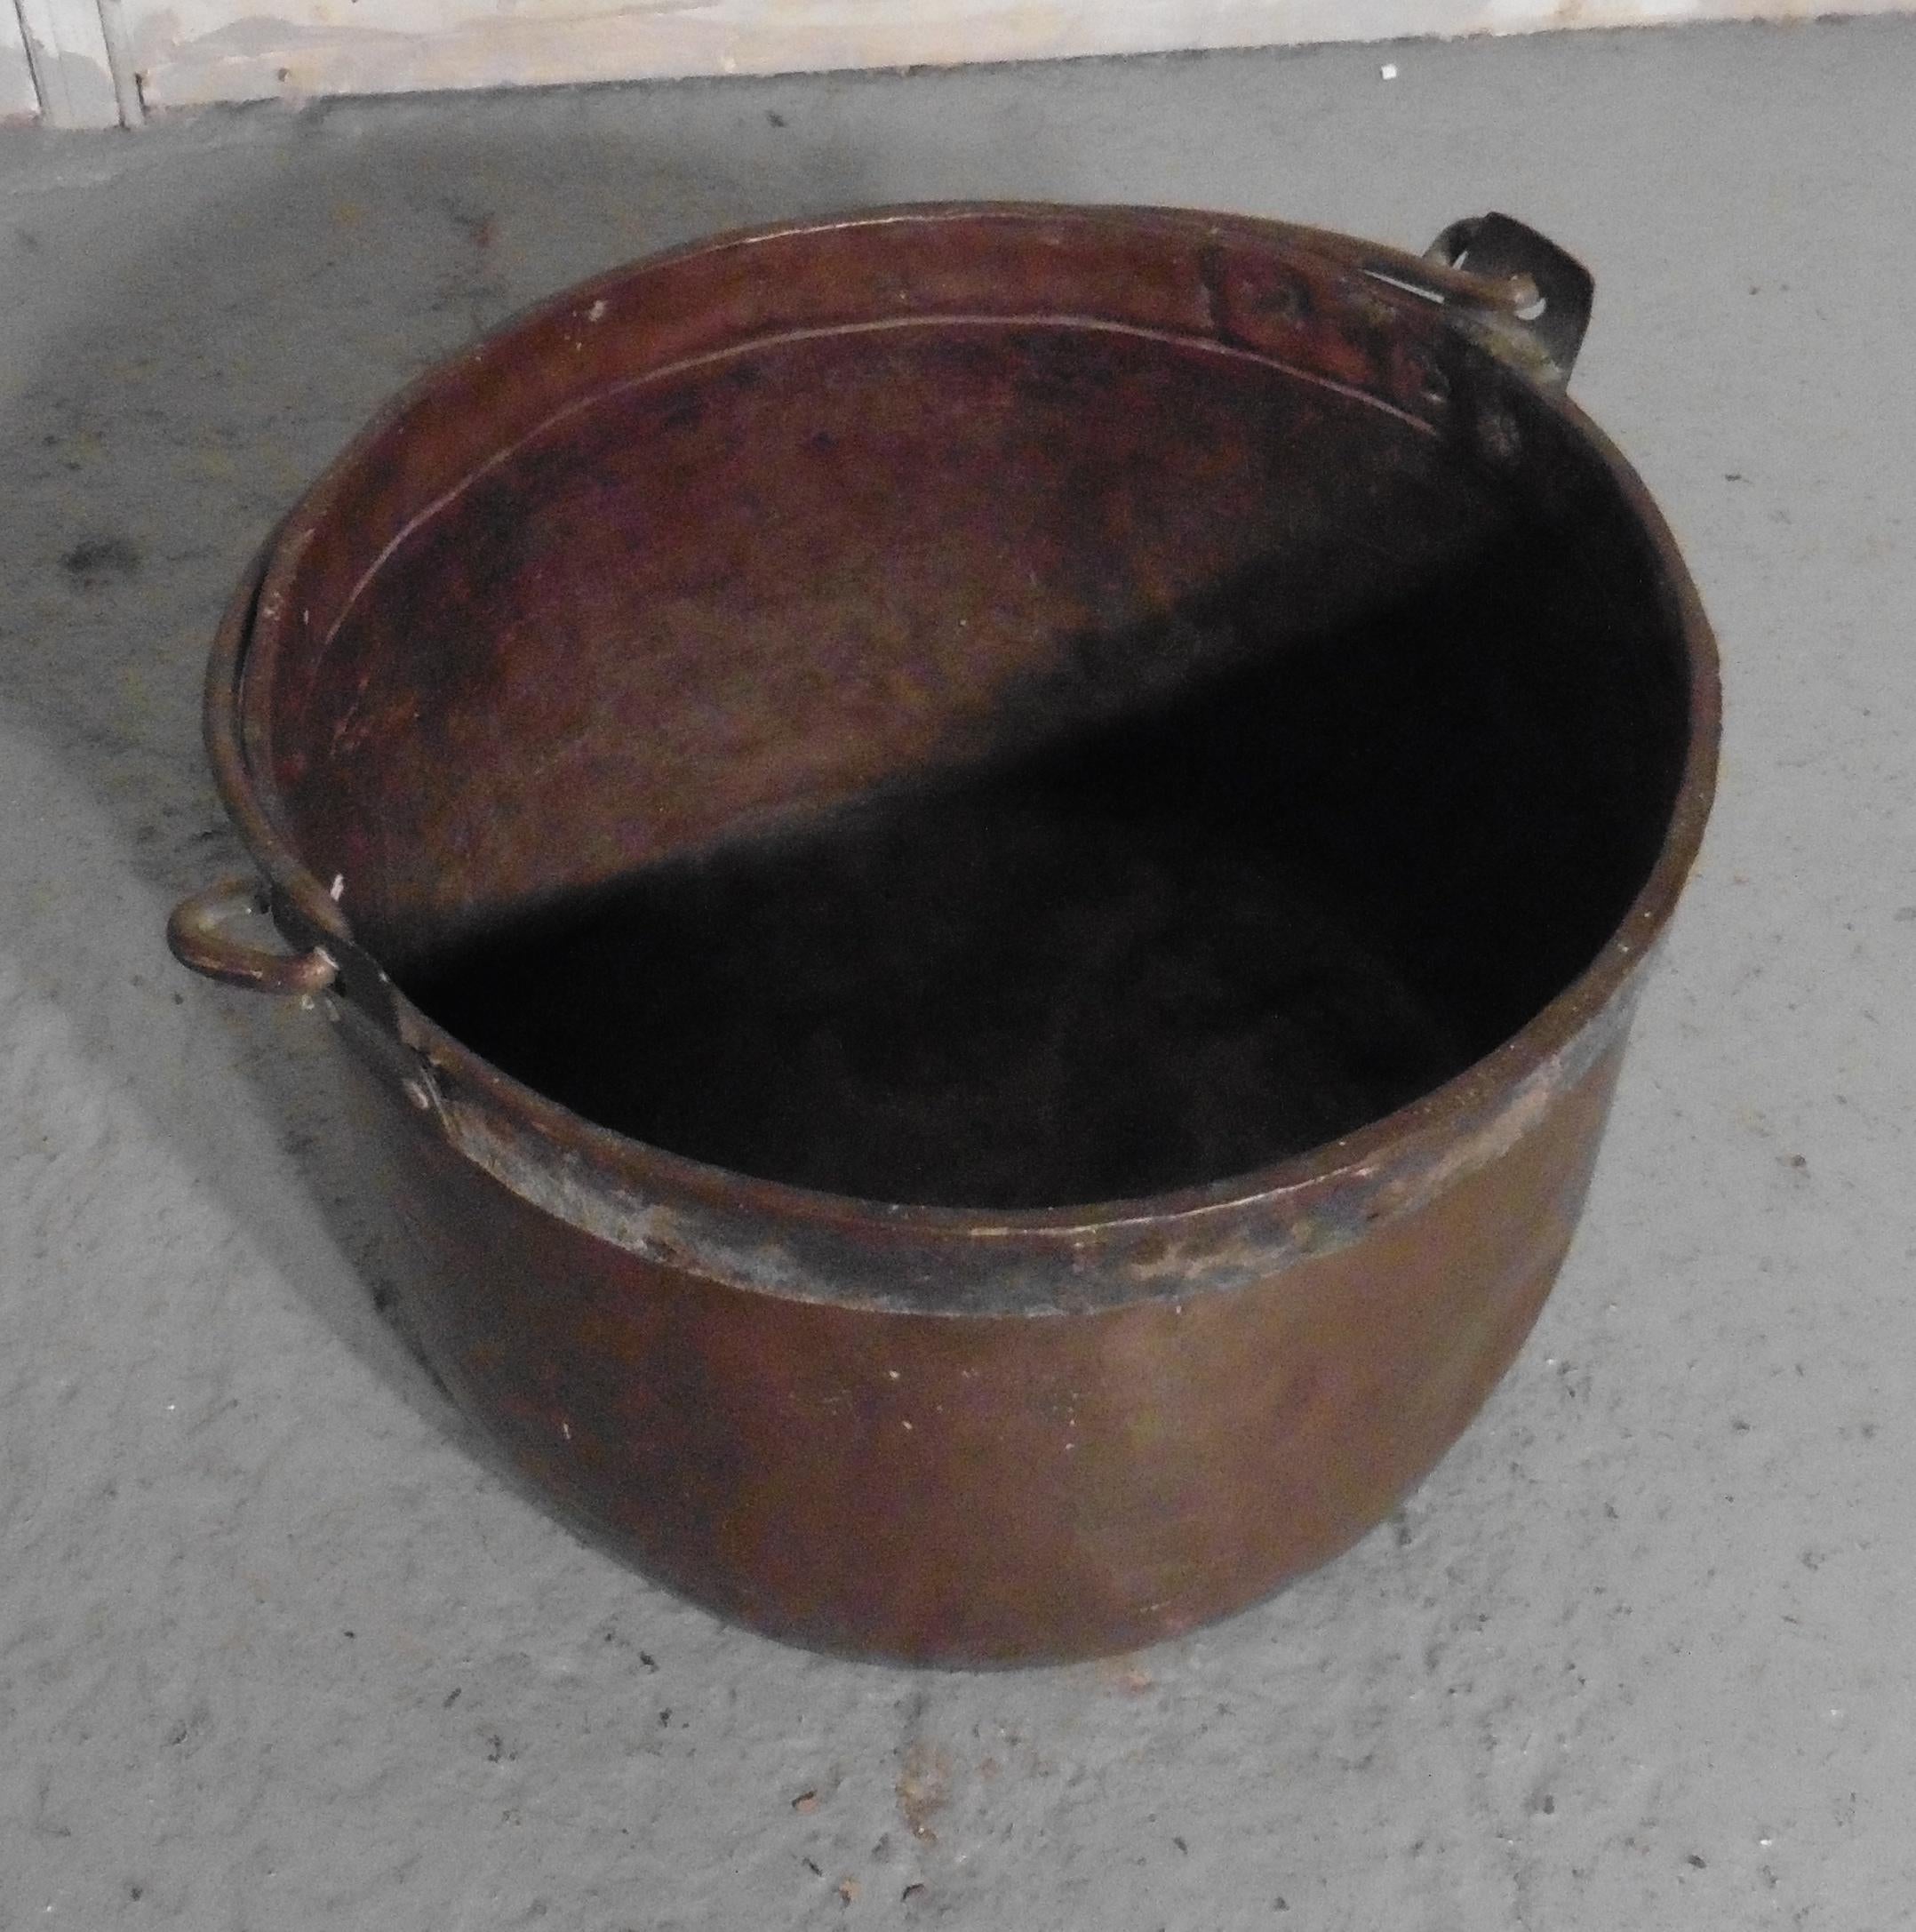 19th century copper cauldron or log bin

This is a lovely big copper cauldron, this is a good big piece and would make a really good log container and handy because it has a carrying handle 

The cauldron is in good well aged condition, it is